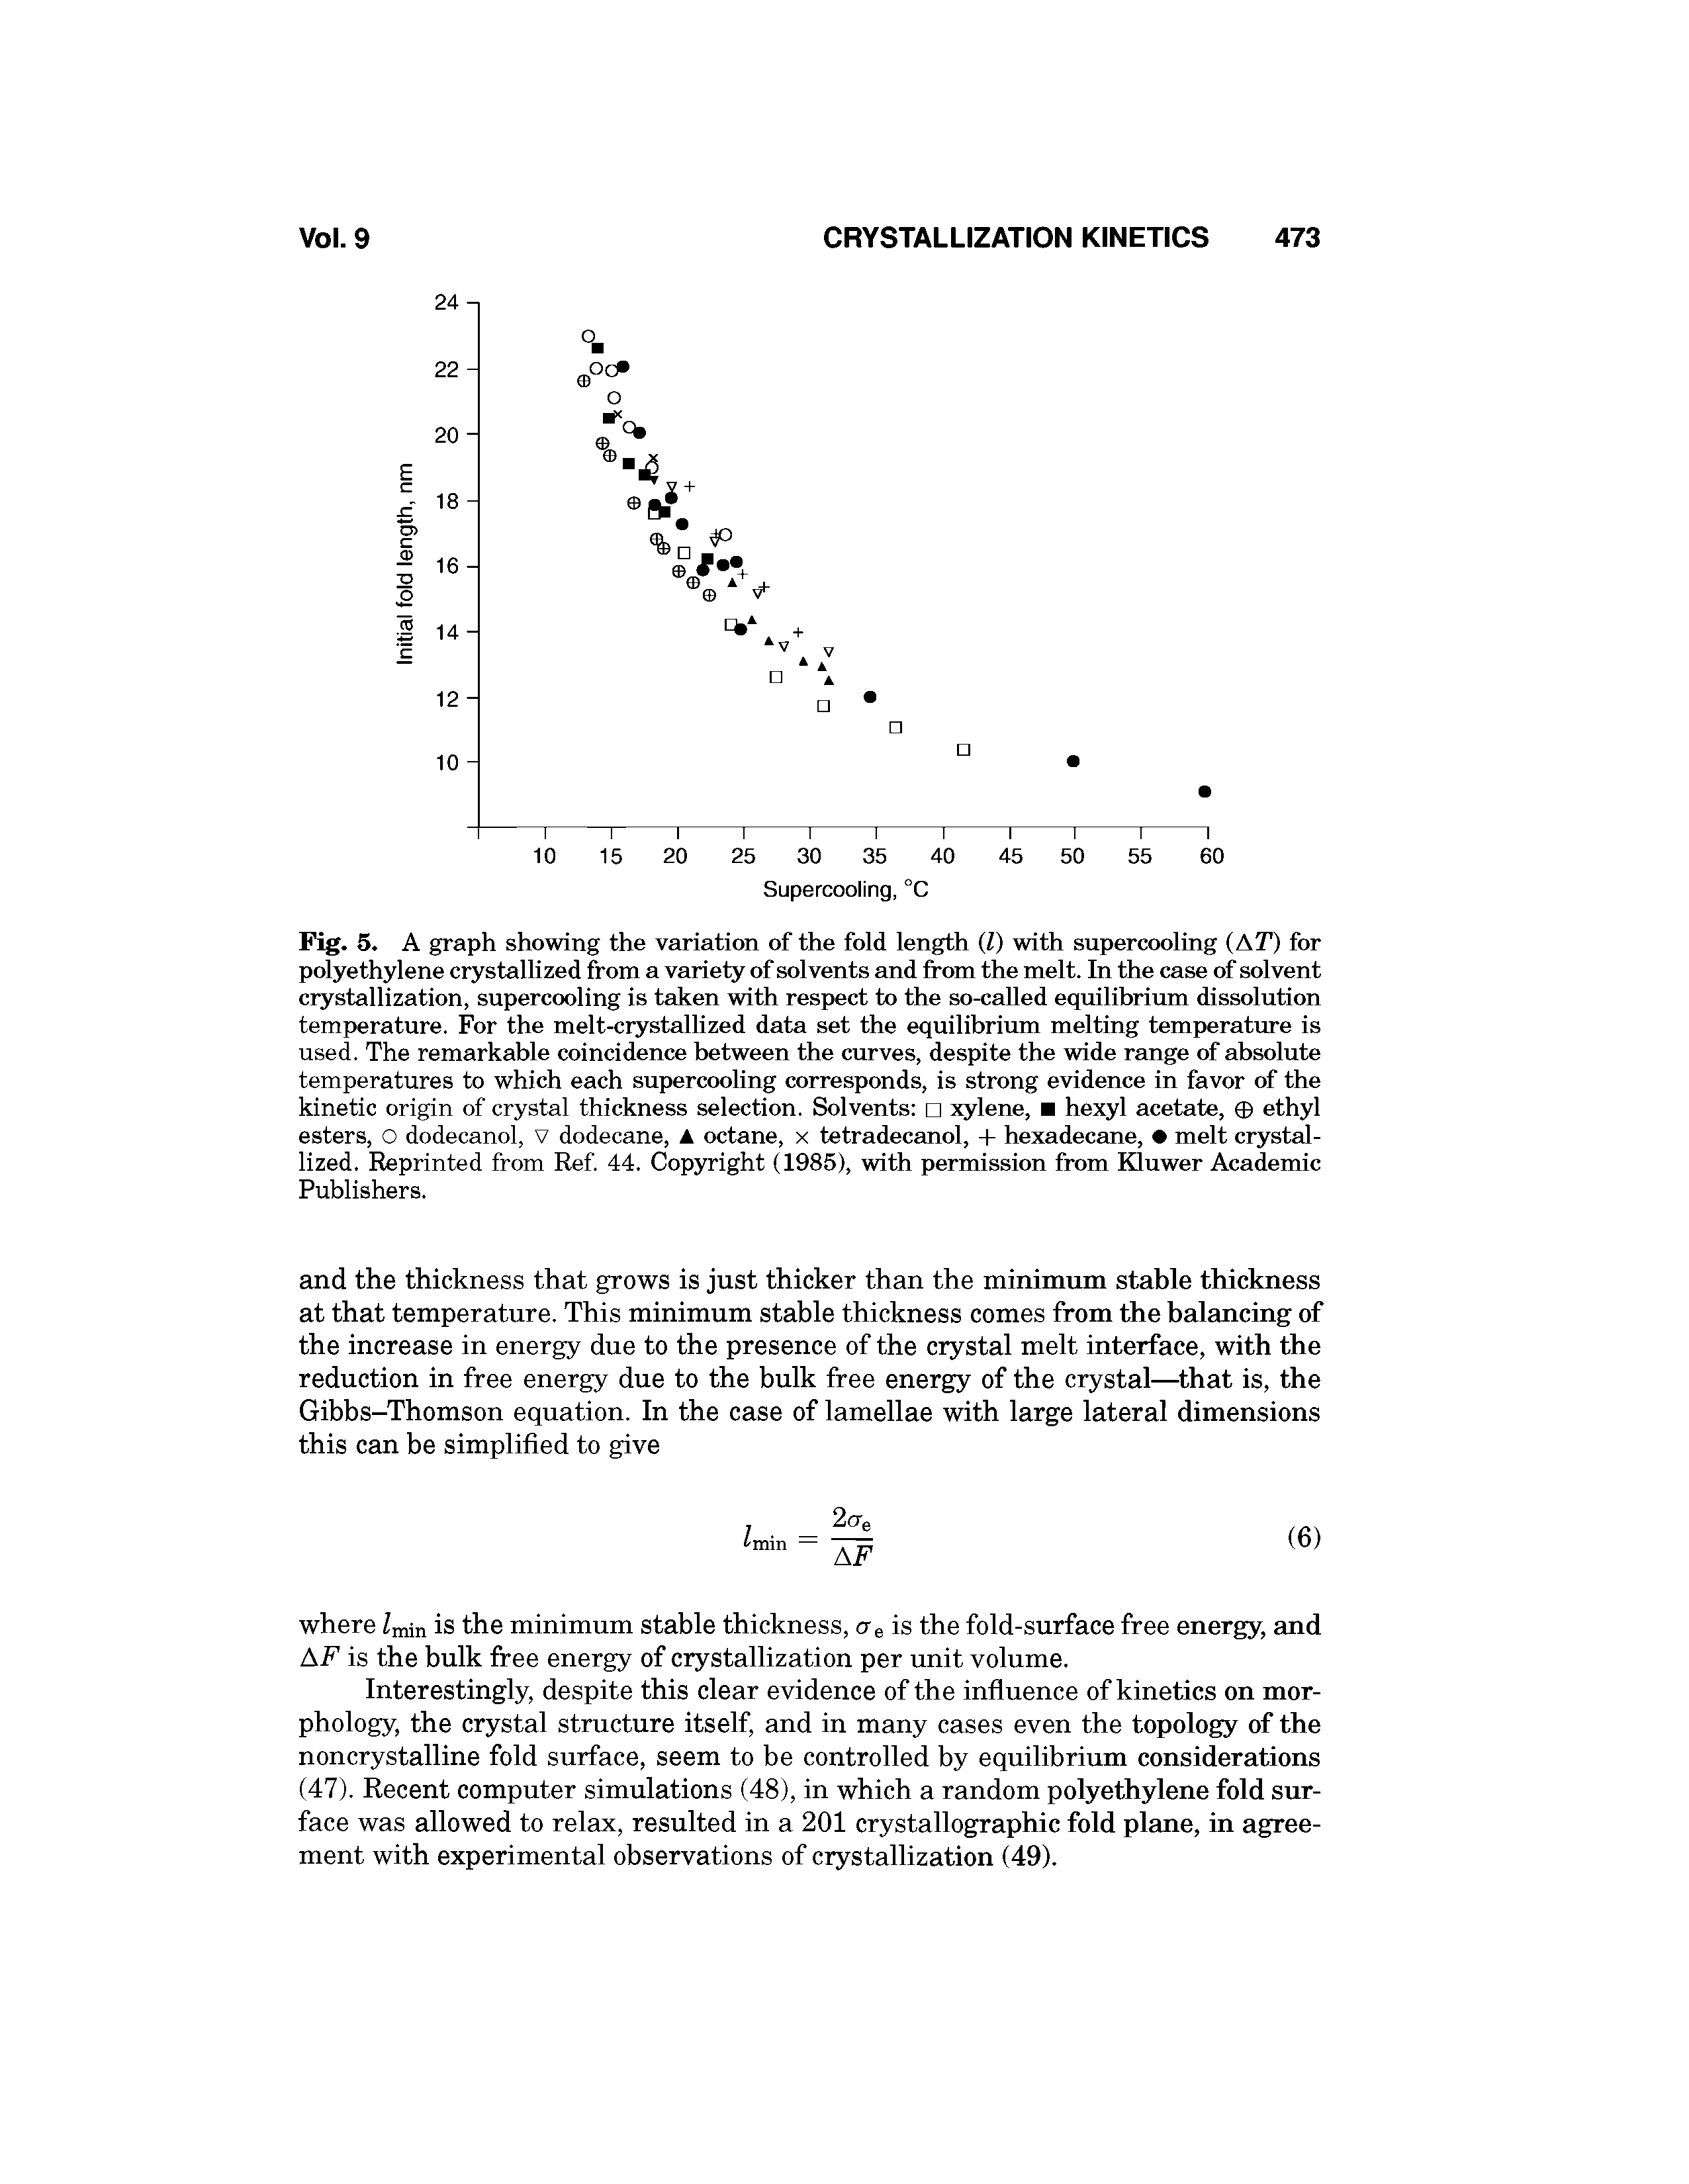 Fig. 5. A graph showing the variation of the fold length (1) with supercooling (AT) for polyethylene crystallized from a variety of solvents and from the melt. In the case of solvent crystallization, supercooling is taken with respect to the so-called equilibrium dissolution temperature. For the melt-crystallized data set the equilibrium melting temperature is used. The remarkable coincidence between the curves, despite the wide range of absolute temperatures to which each supercooling corresponds, is strong evidence in favor of the kinetic origin of crystal thickness selection. Solvents xylene, hexyl acetate, 0 ethyl esters, O dodecanol, V dodecane, A octane, x tetradecanol, + hexadecane, melt crystallized. Reprinted from Ref. 44. Copsright (1985), with permission from Kluwer Academic Publishers.